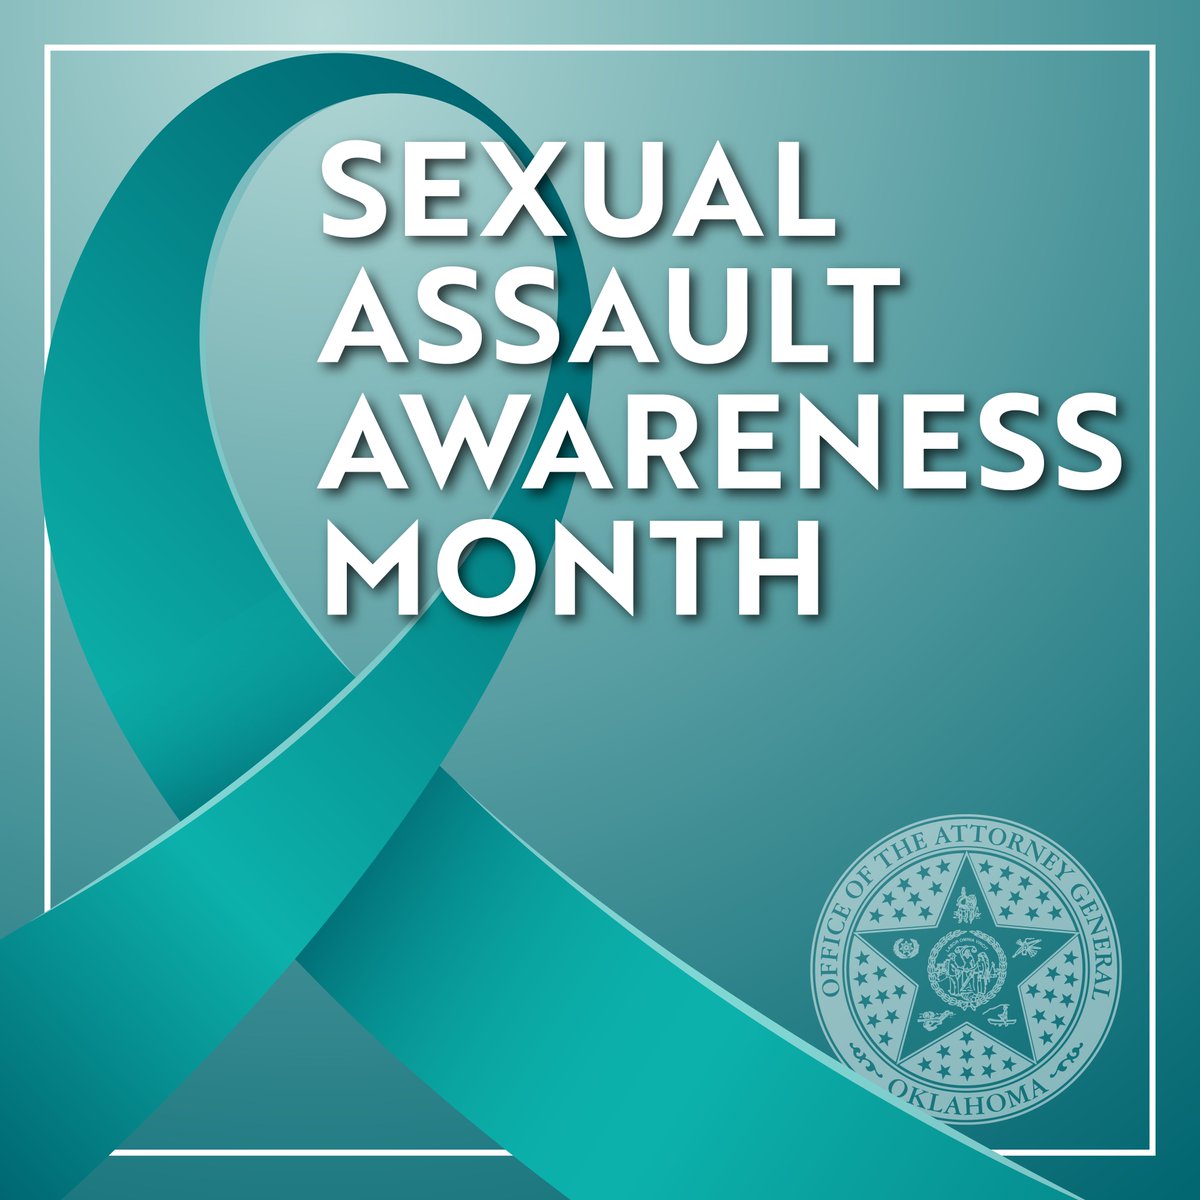 Throughout April, and year round, my office is working to prevent sexual assault crimes, promote awareness and seek justice for survivors. Anyone who needs help escaping abuse can call 1-800-522-SAFE (7233). #SAAM2024